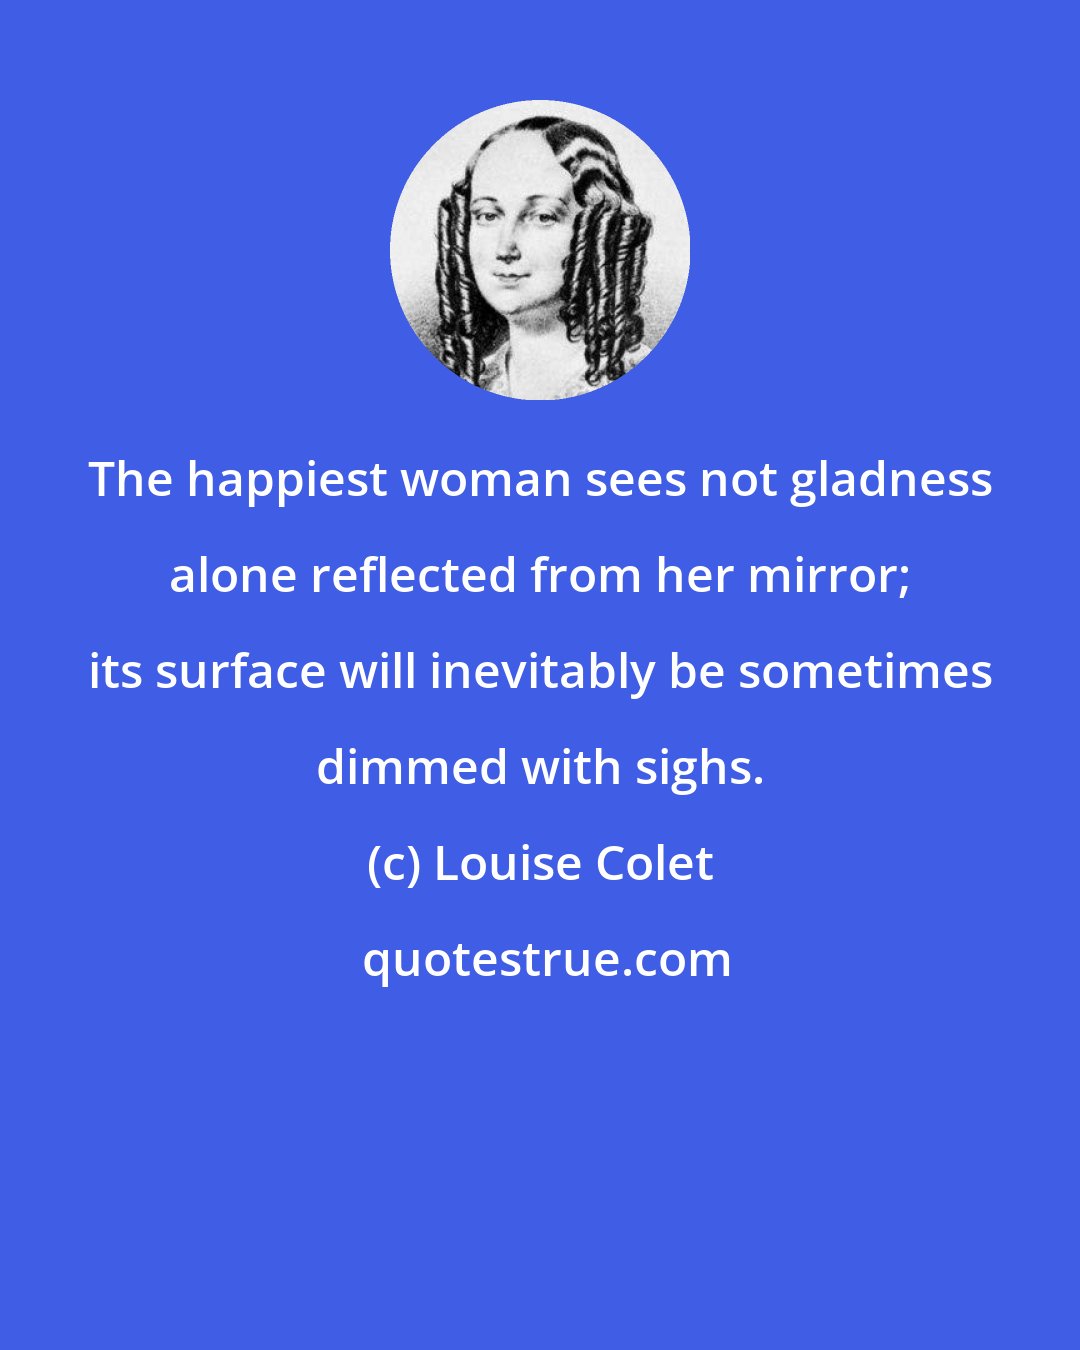 Louise Colet: The happiest woman sees not gladness alone reflected from her mirror; its surface will inevitably be sometimes dimmed with sighs.